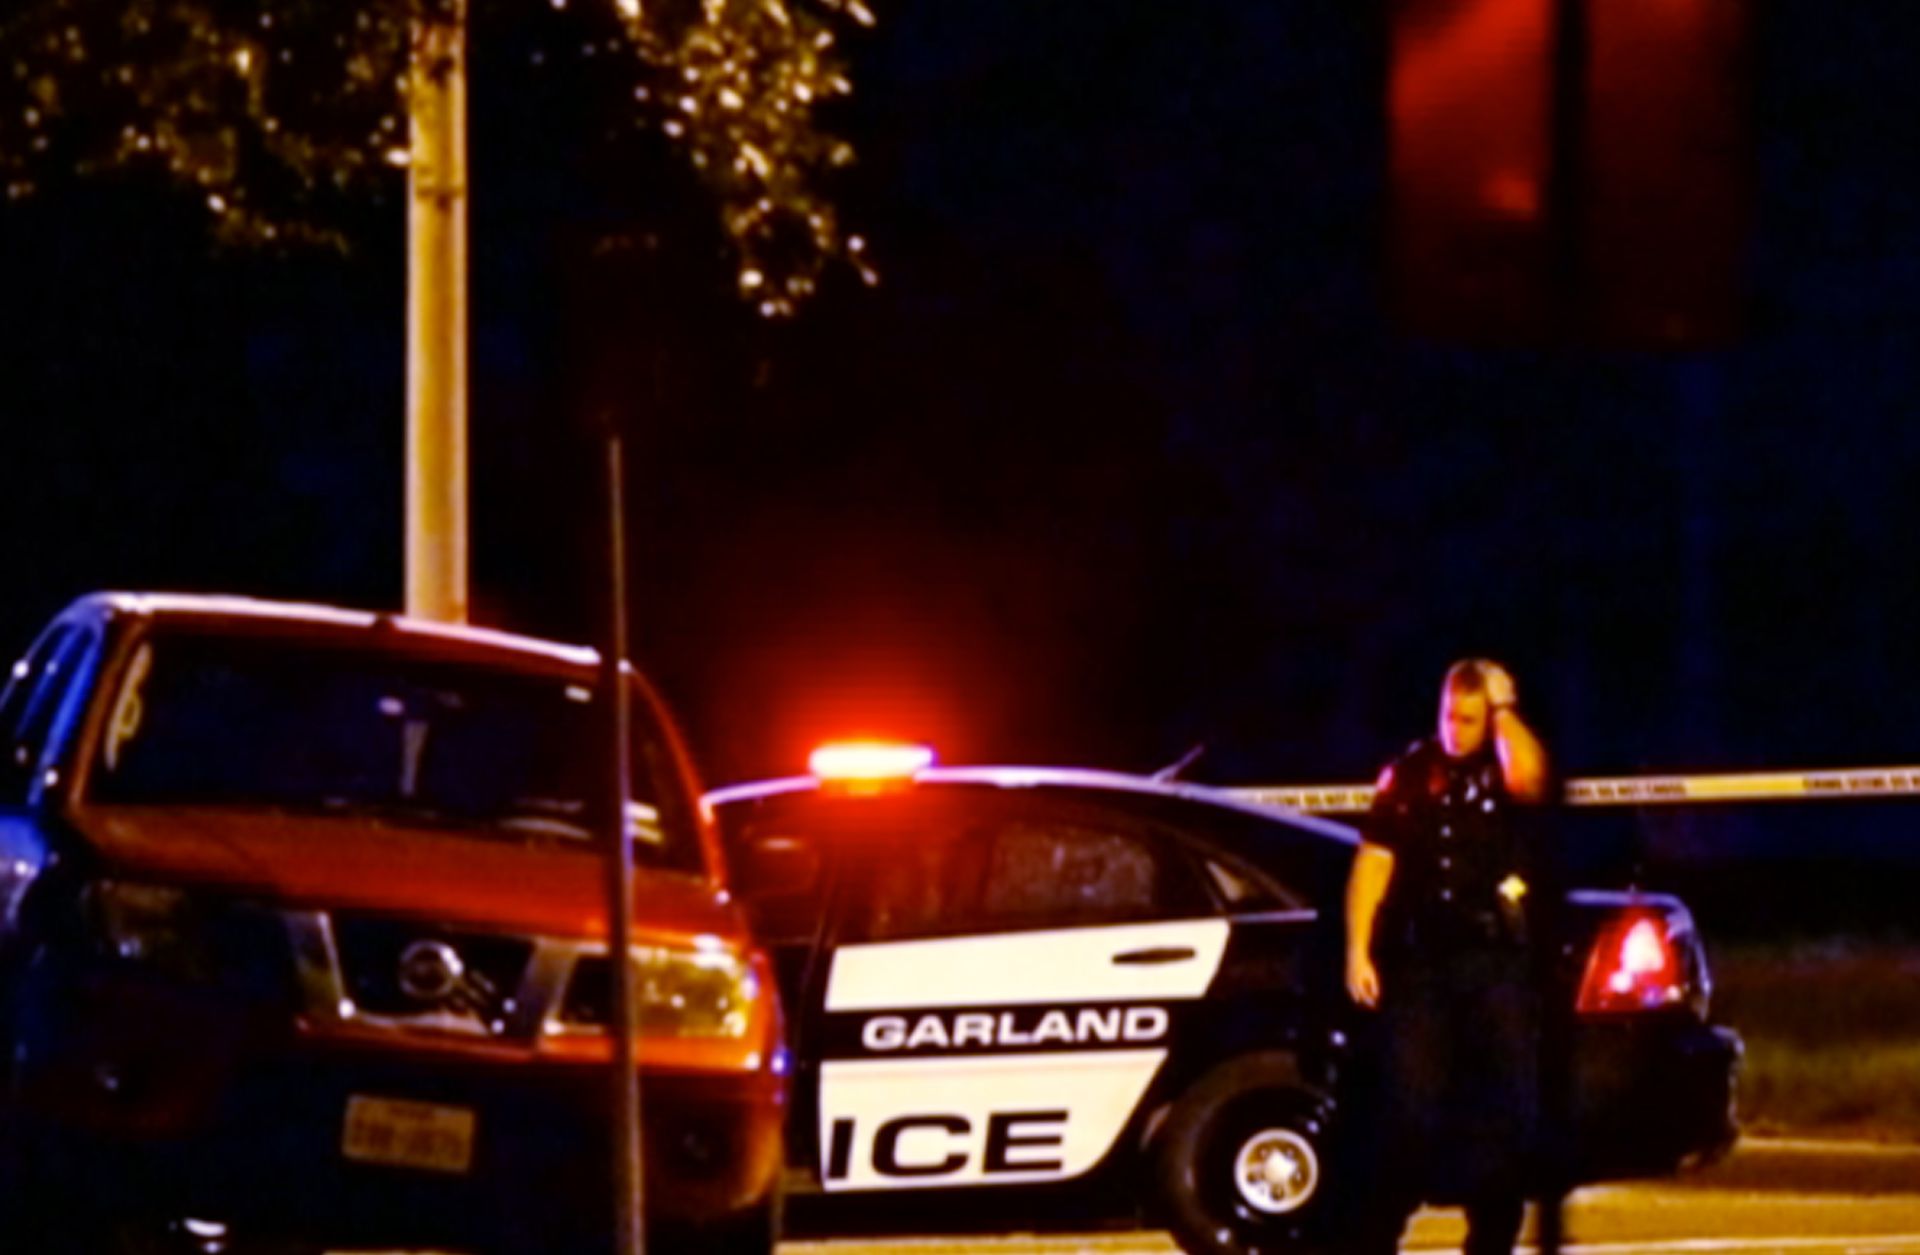 Police respond to a shooting at an anti-Islam art show in Garland, Texas. 